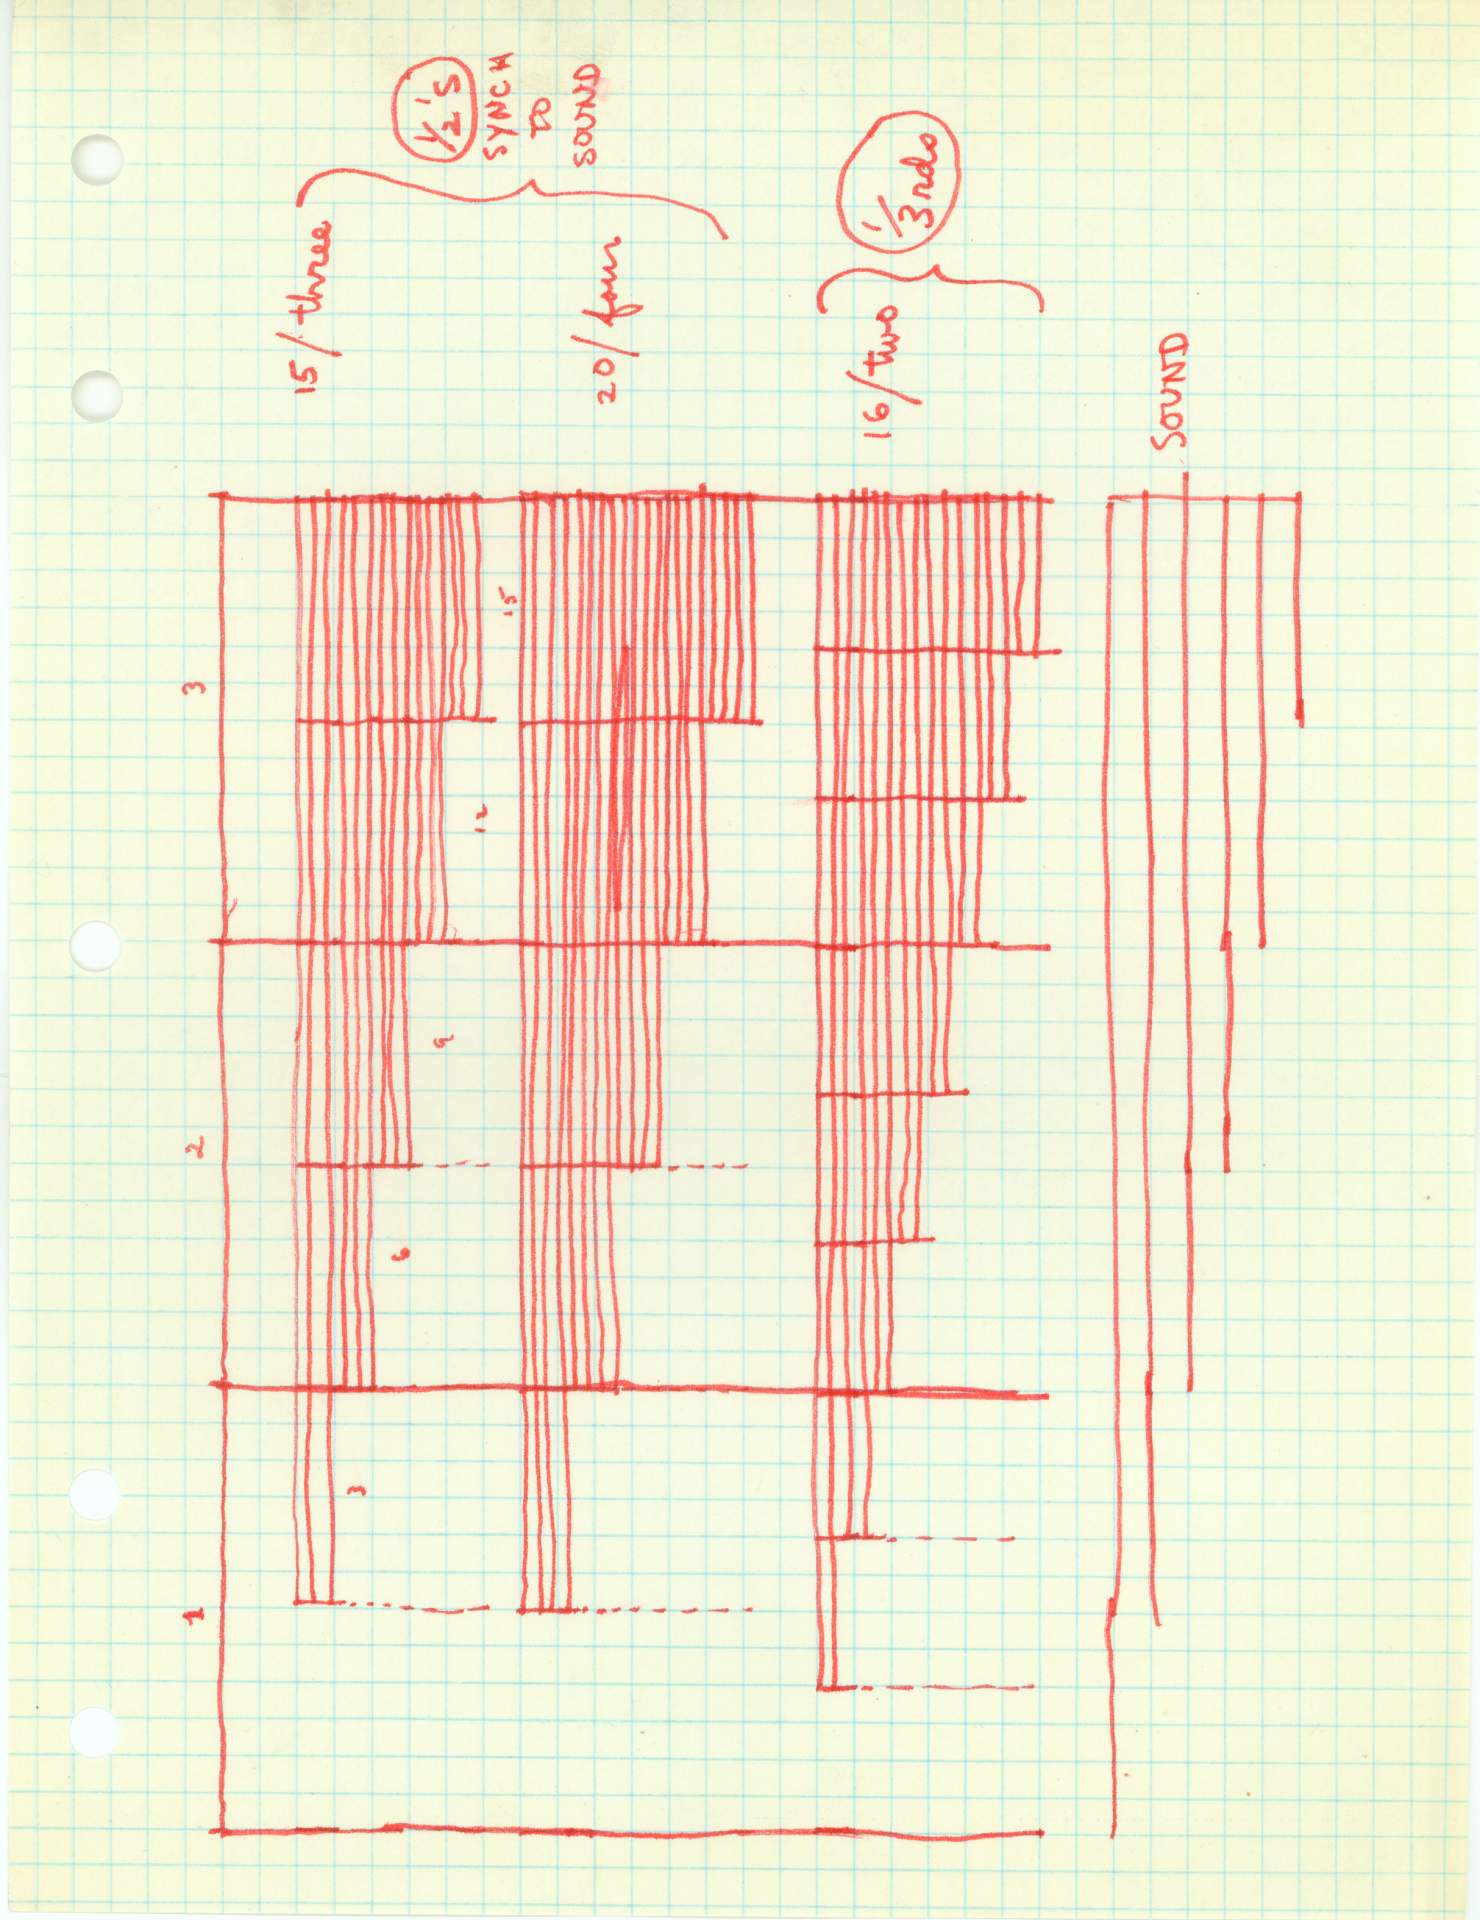 Untitled (graph with red lines)